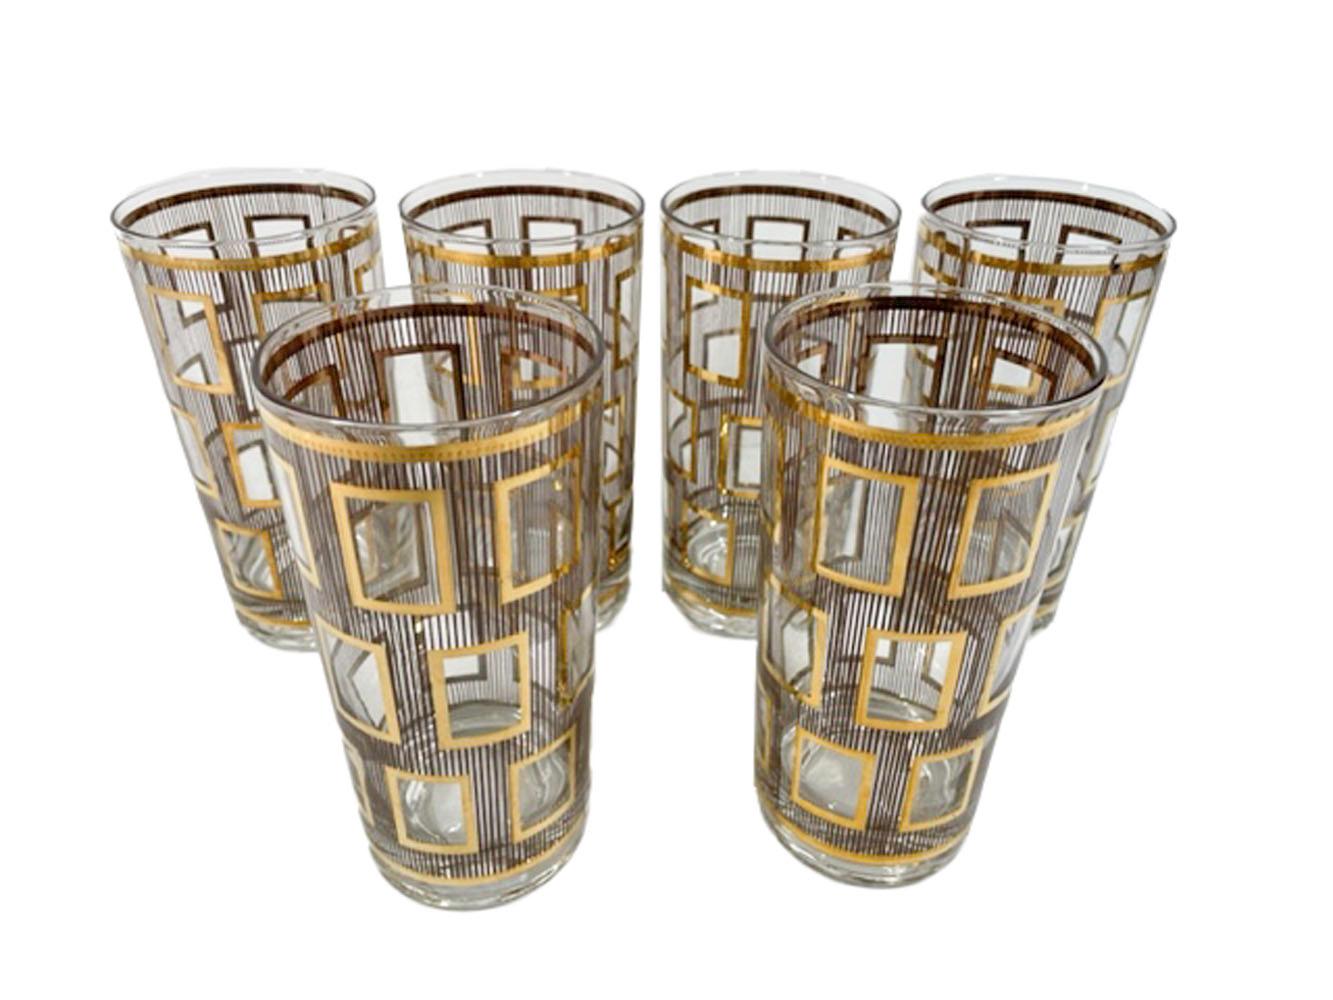 Six vintage Georges Briard highball glasses in the 